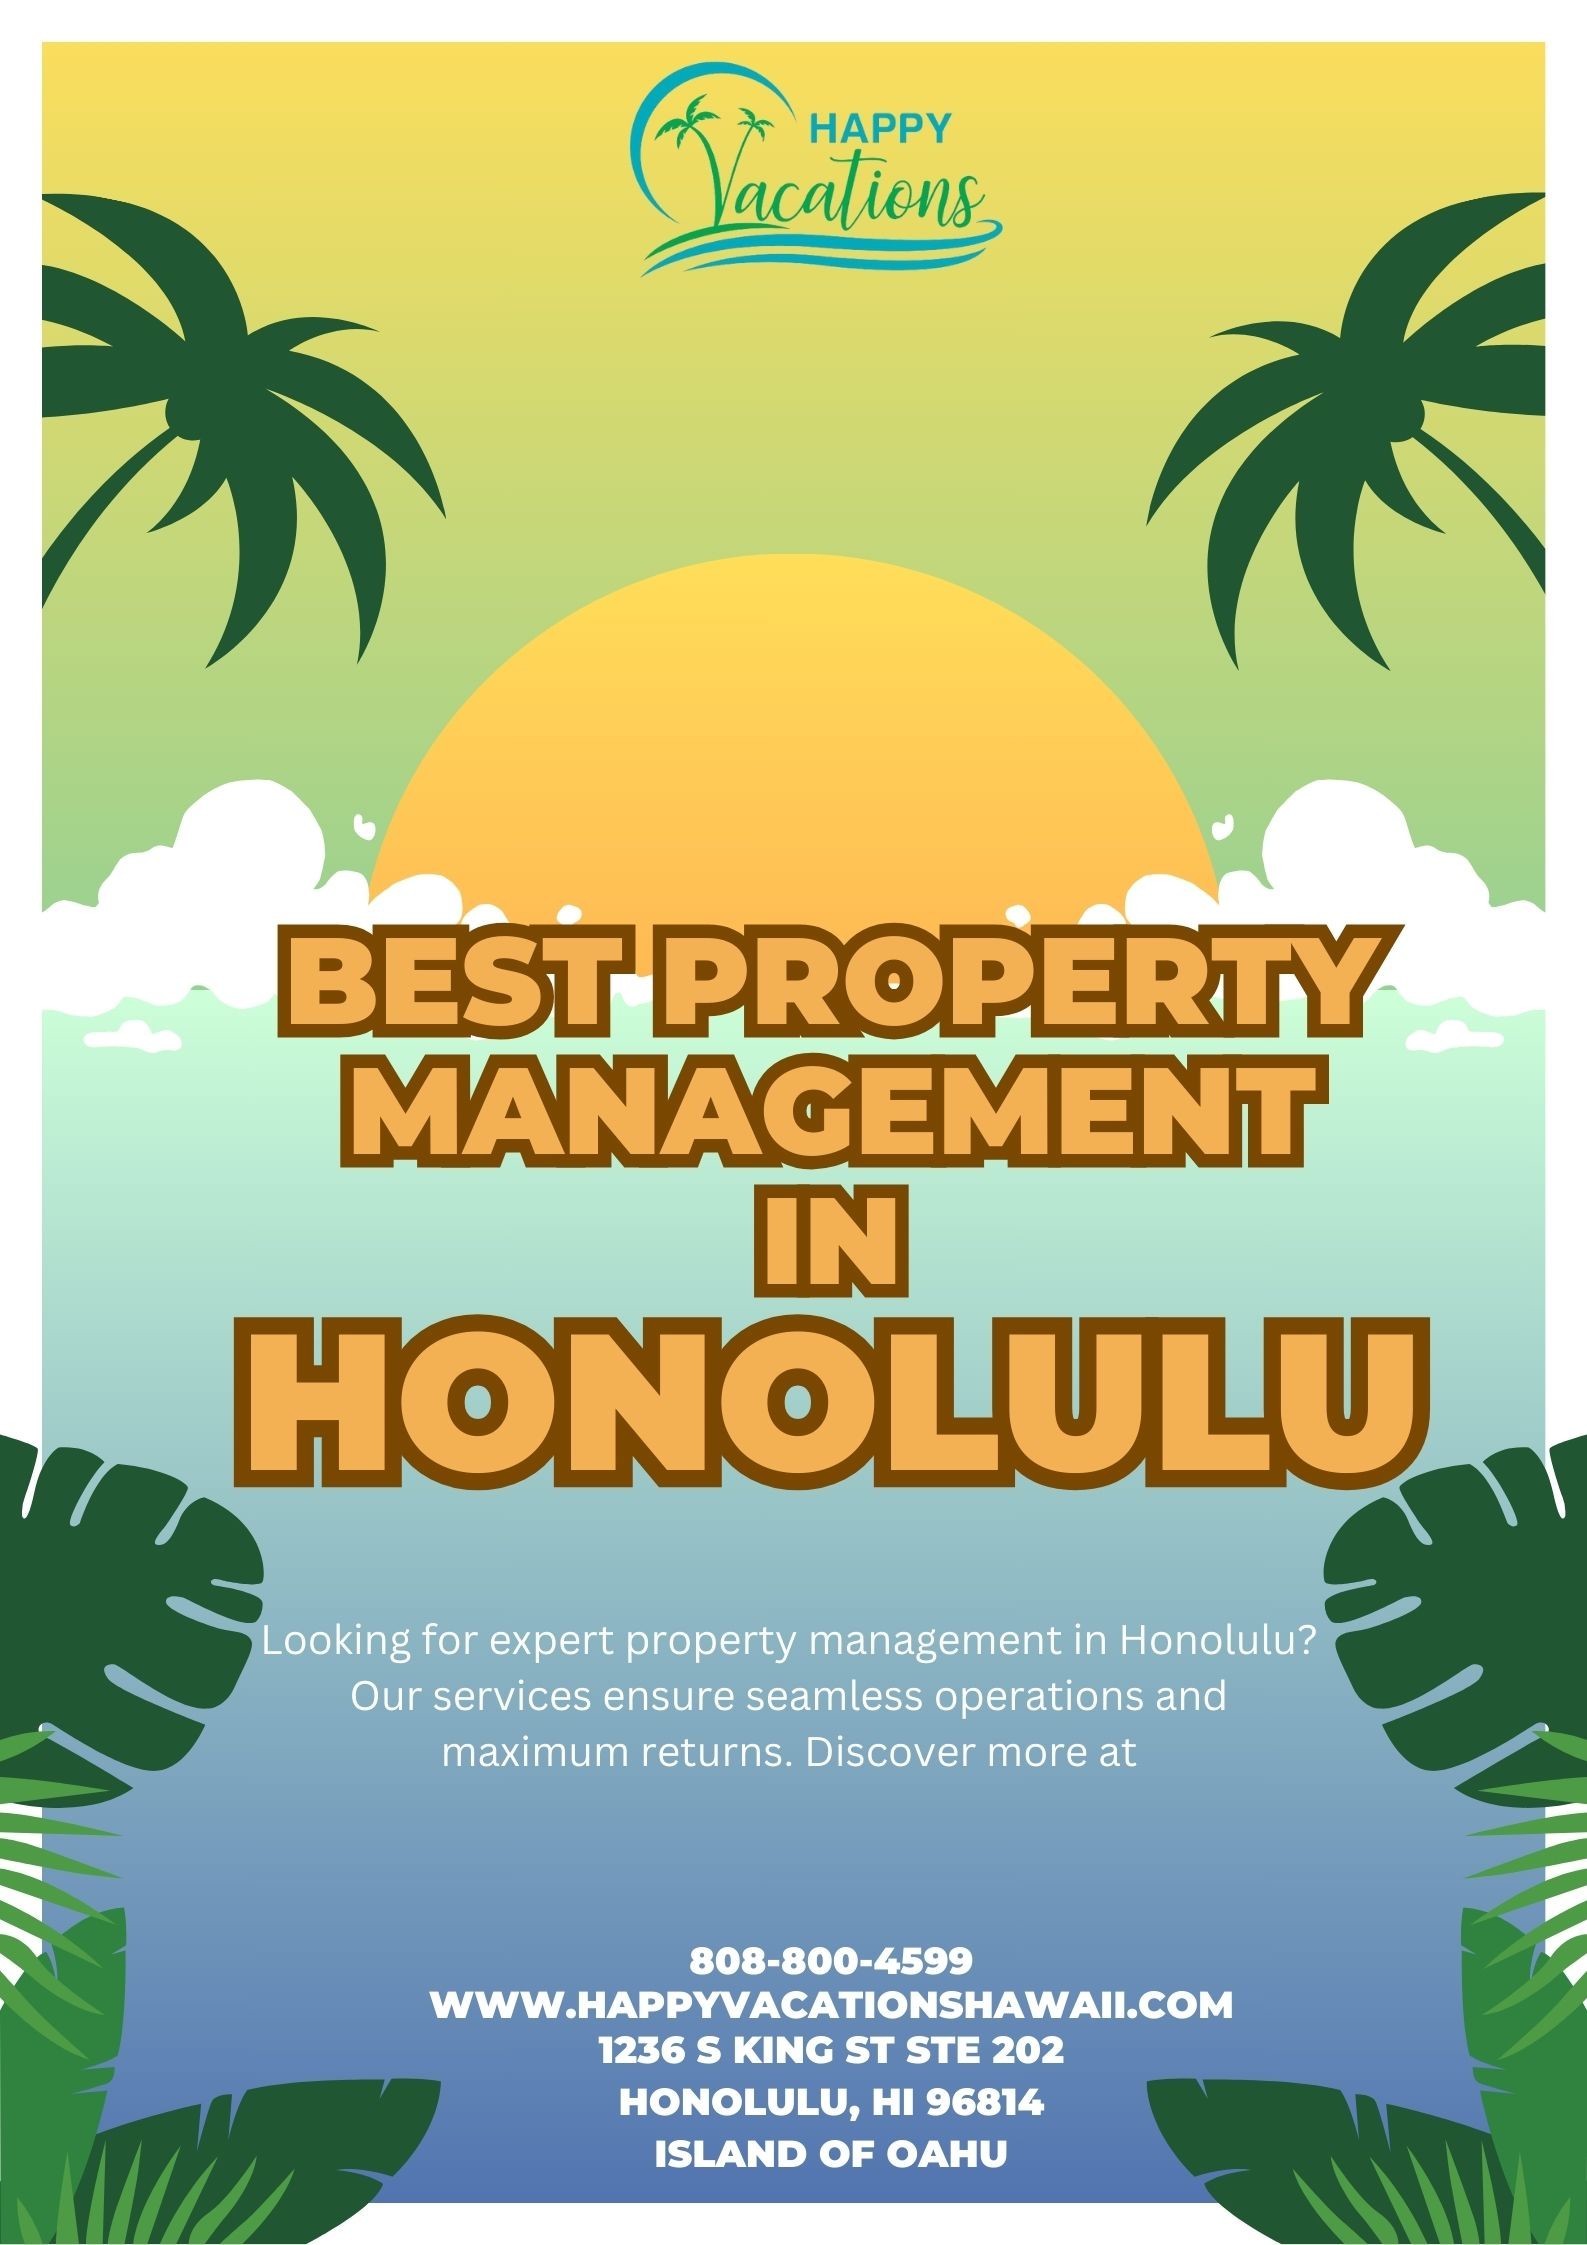 Best Property Management in Honolulu - Call Now (808) 800-4599